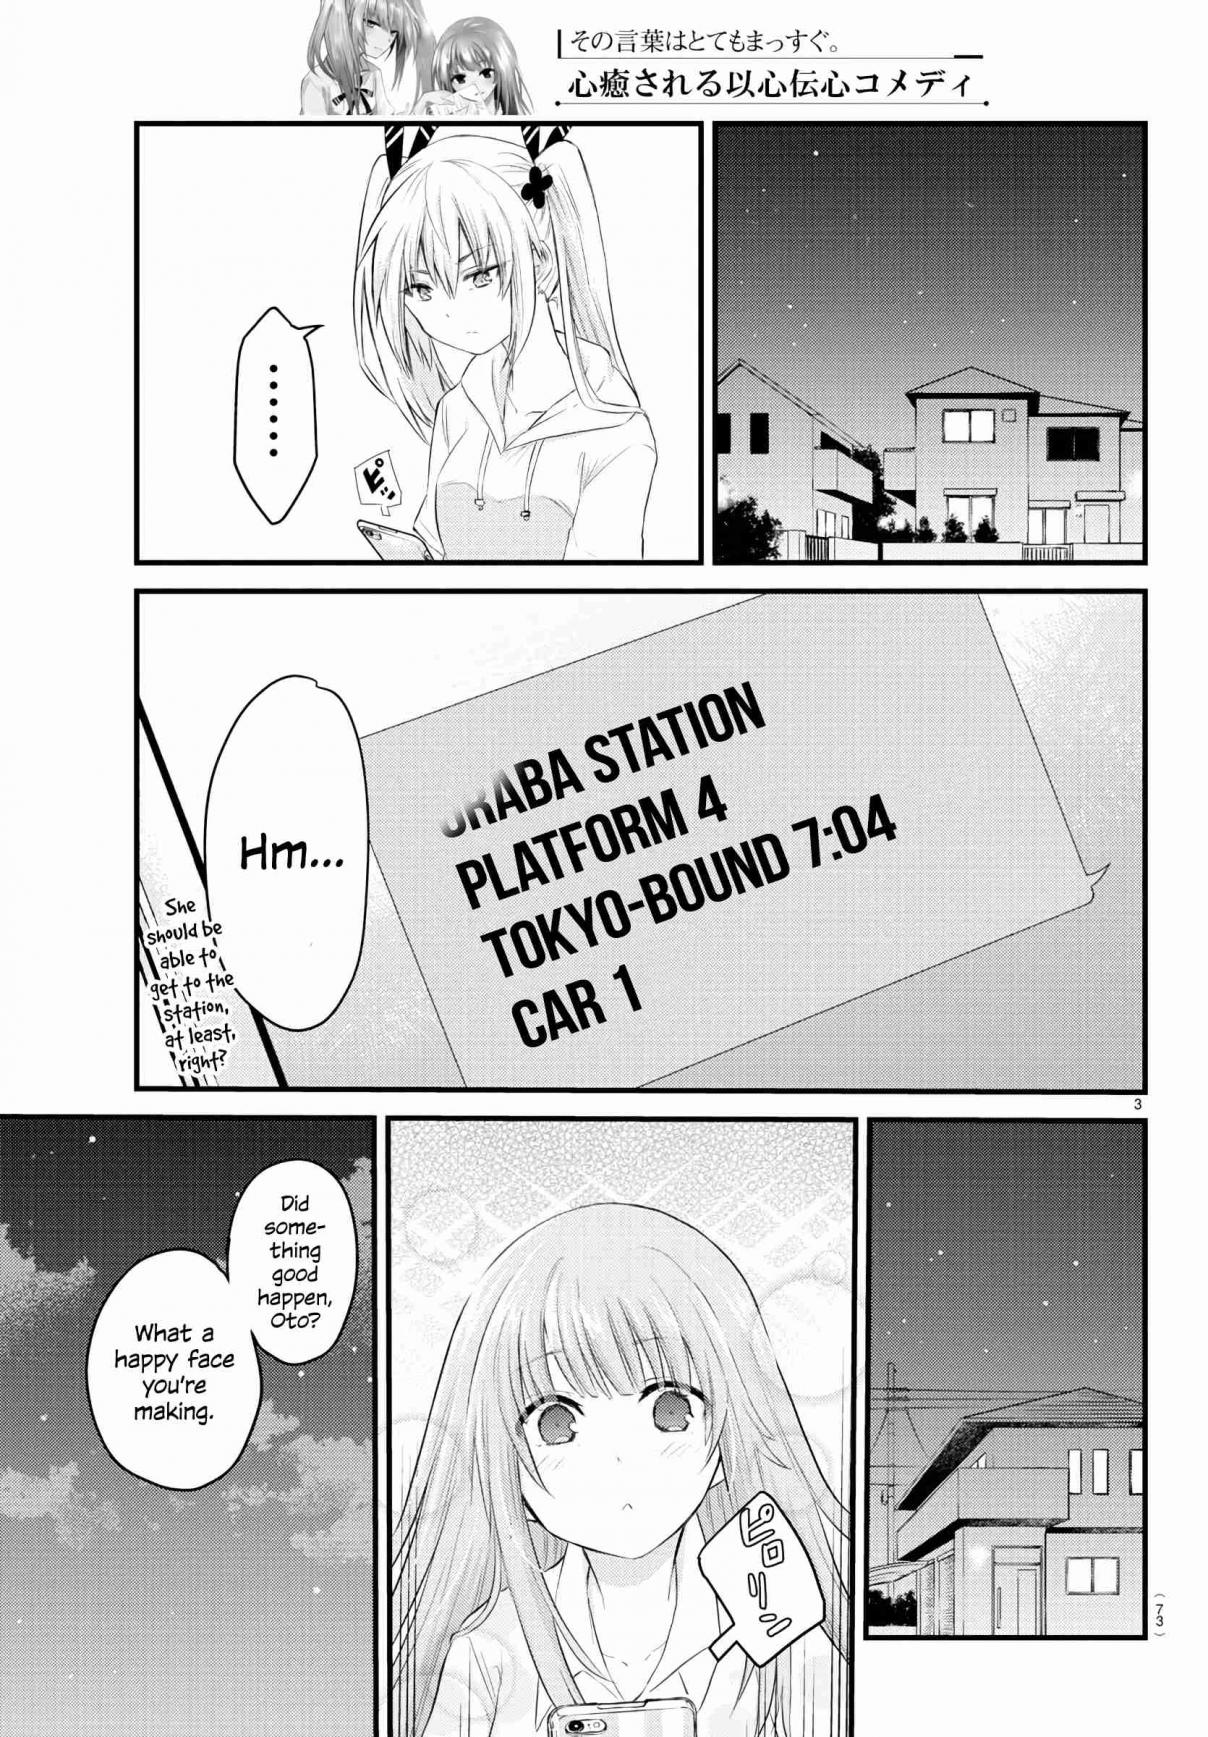 A Girl Who Can't Speak Thinks "She Is Too Kind." Vol. 1 Ch. 11 Field Trip, Part 1